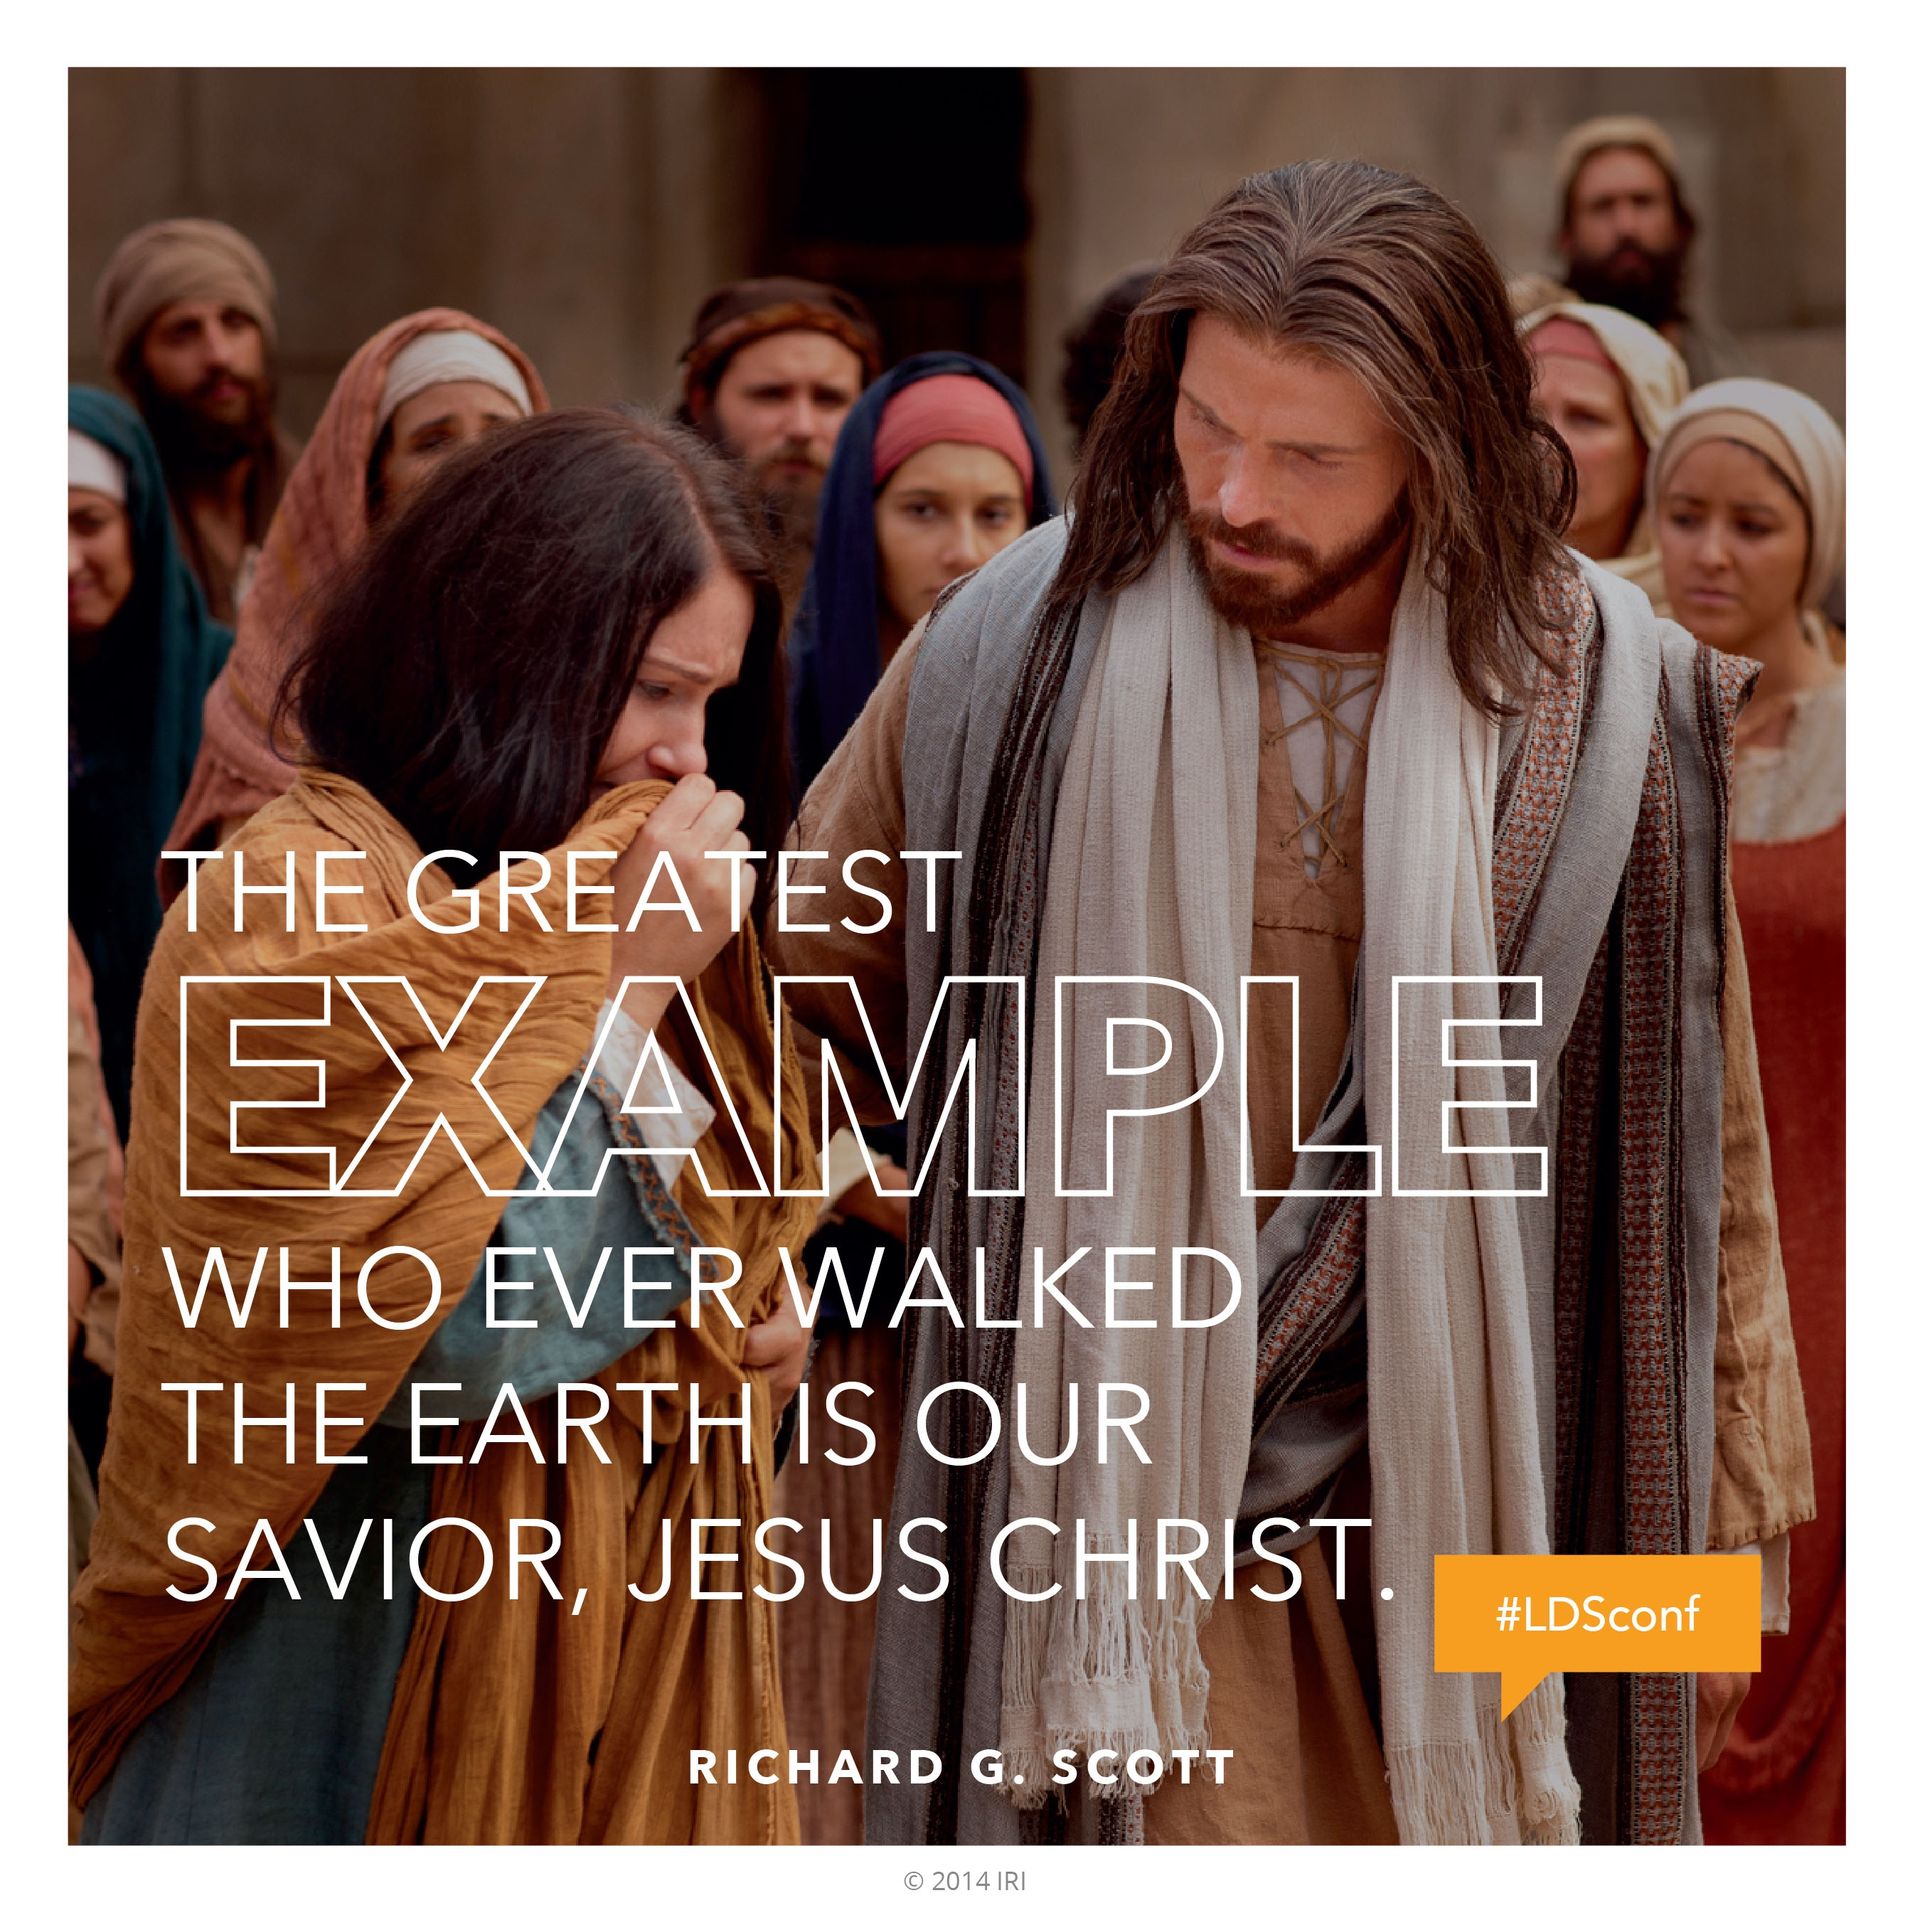 “The greatest example who ever walked the earth is our Savior, Jesus Christ.”—Elder Richard G. Scott, “I Have Given You an Example” © undefined ipCode 1.